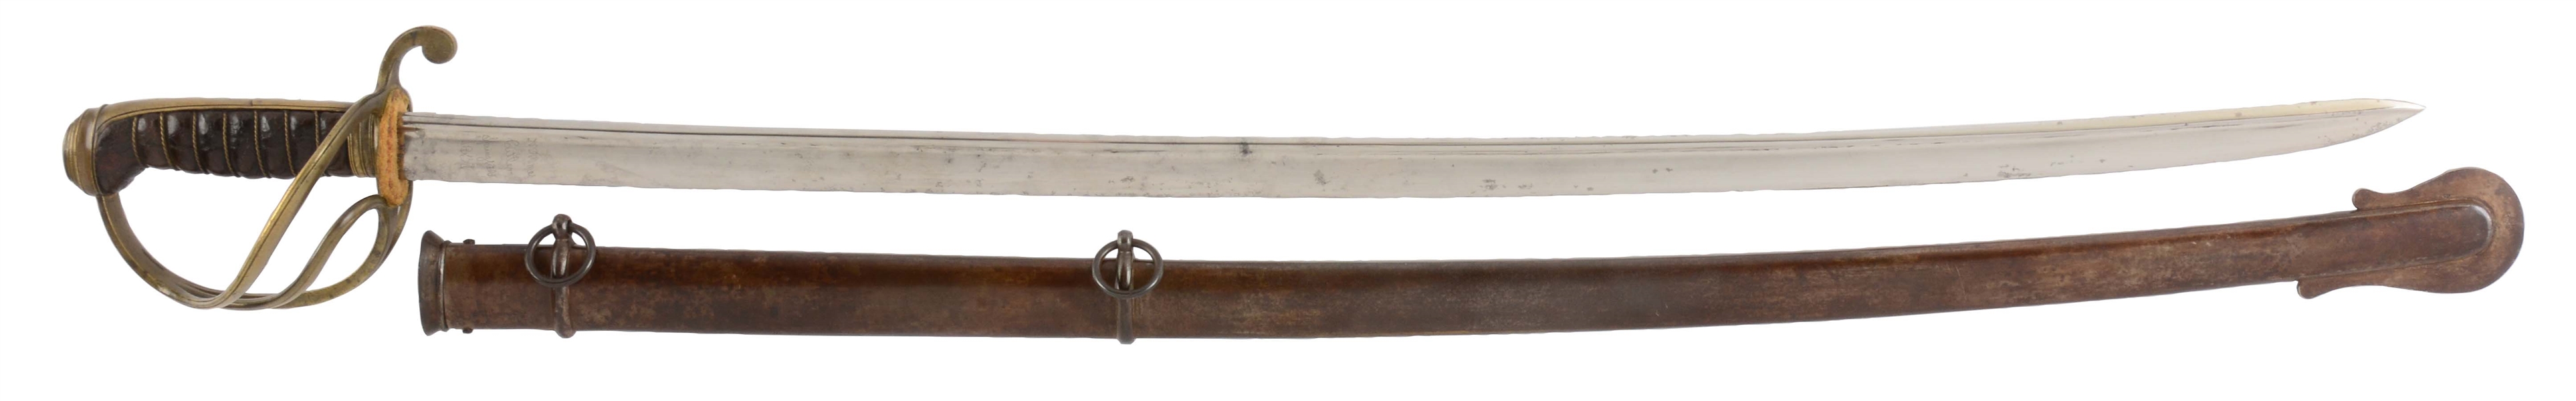 AMES MODEL 1833 DRAGOON SABER WITH SCABBARD.